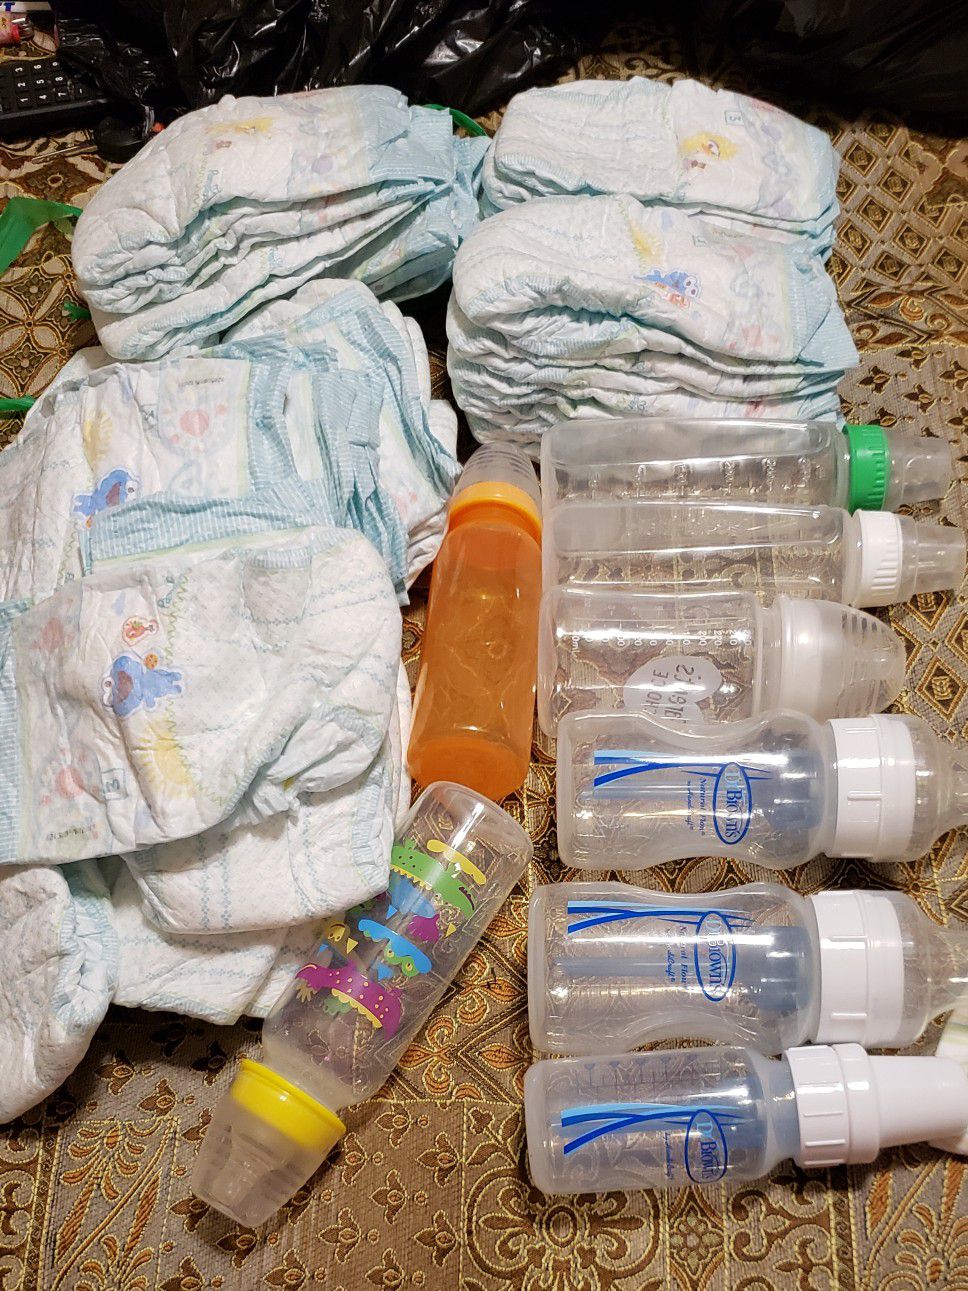 I have a lot of baby things One z's sleepers Toys 10 baby bottles 3R doctor Brown All for $50 there for boys then I have a girls crib set for $15